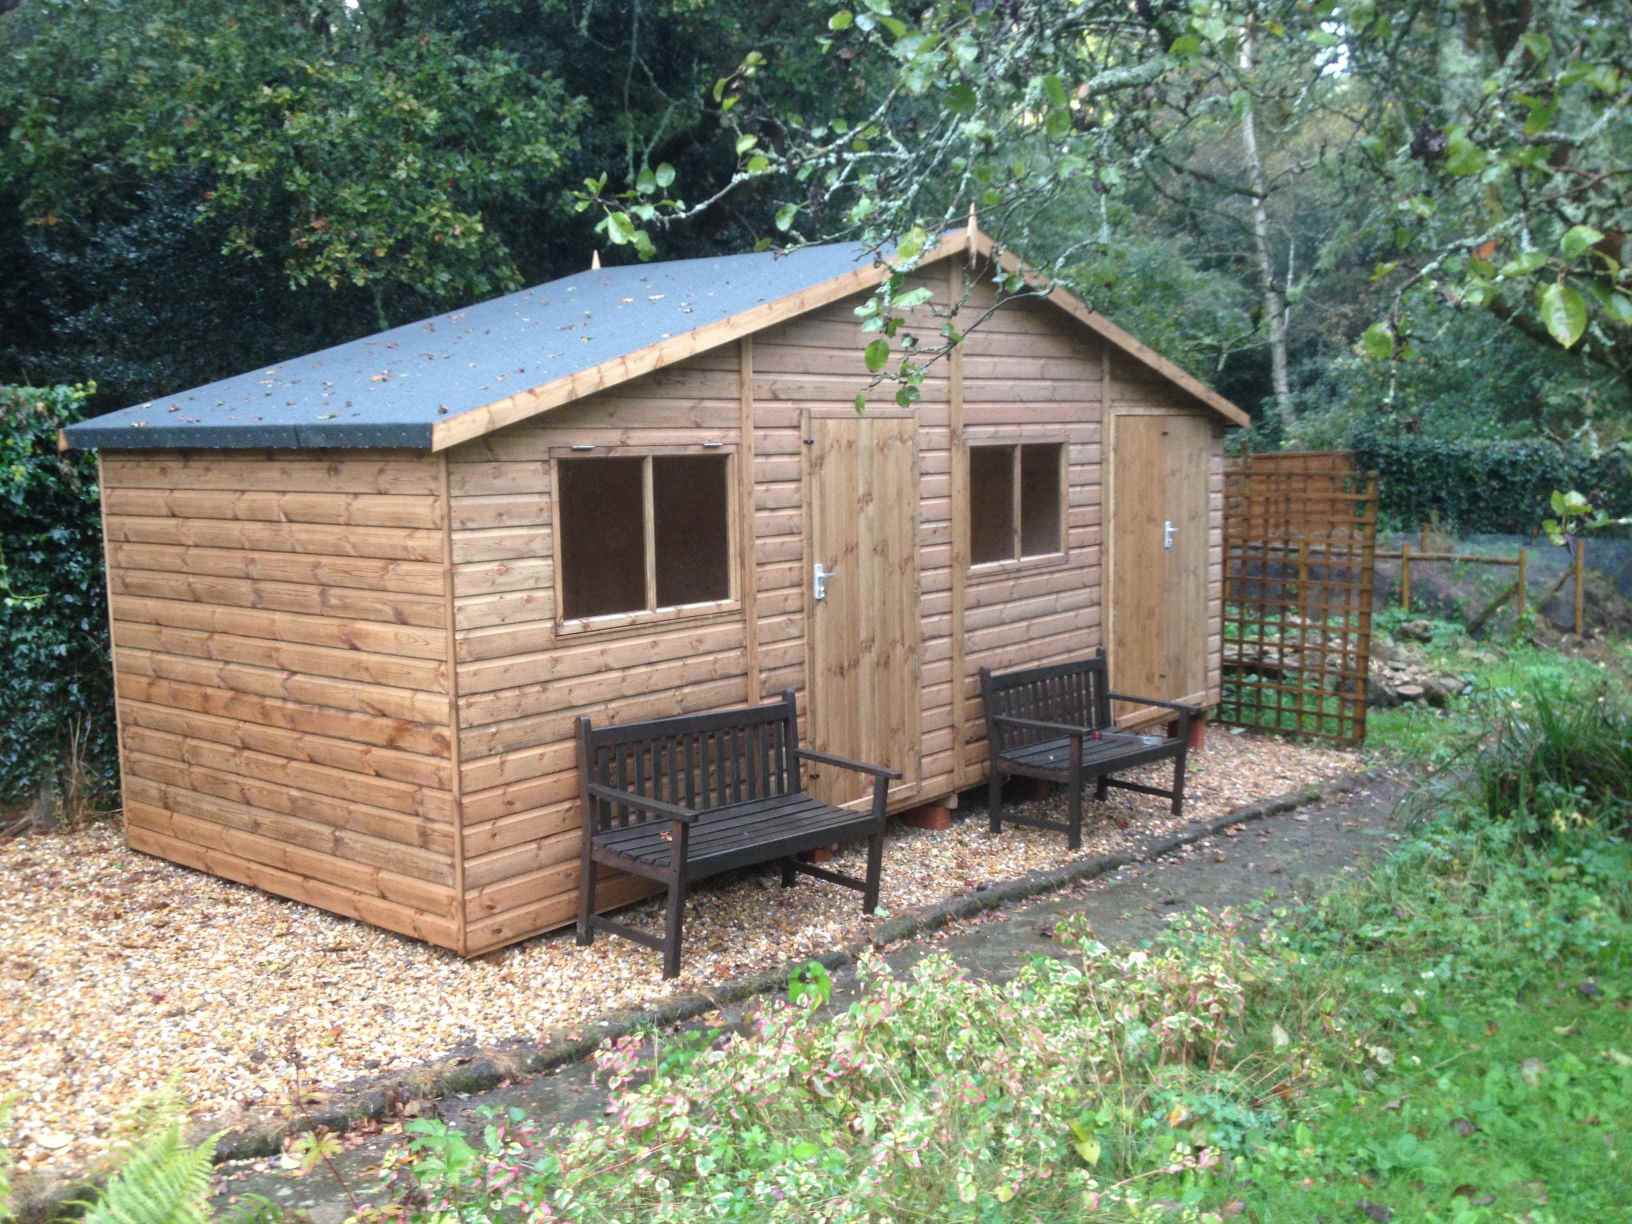 Summer Houses / Cabins / Home Office - MB Garden Building